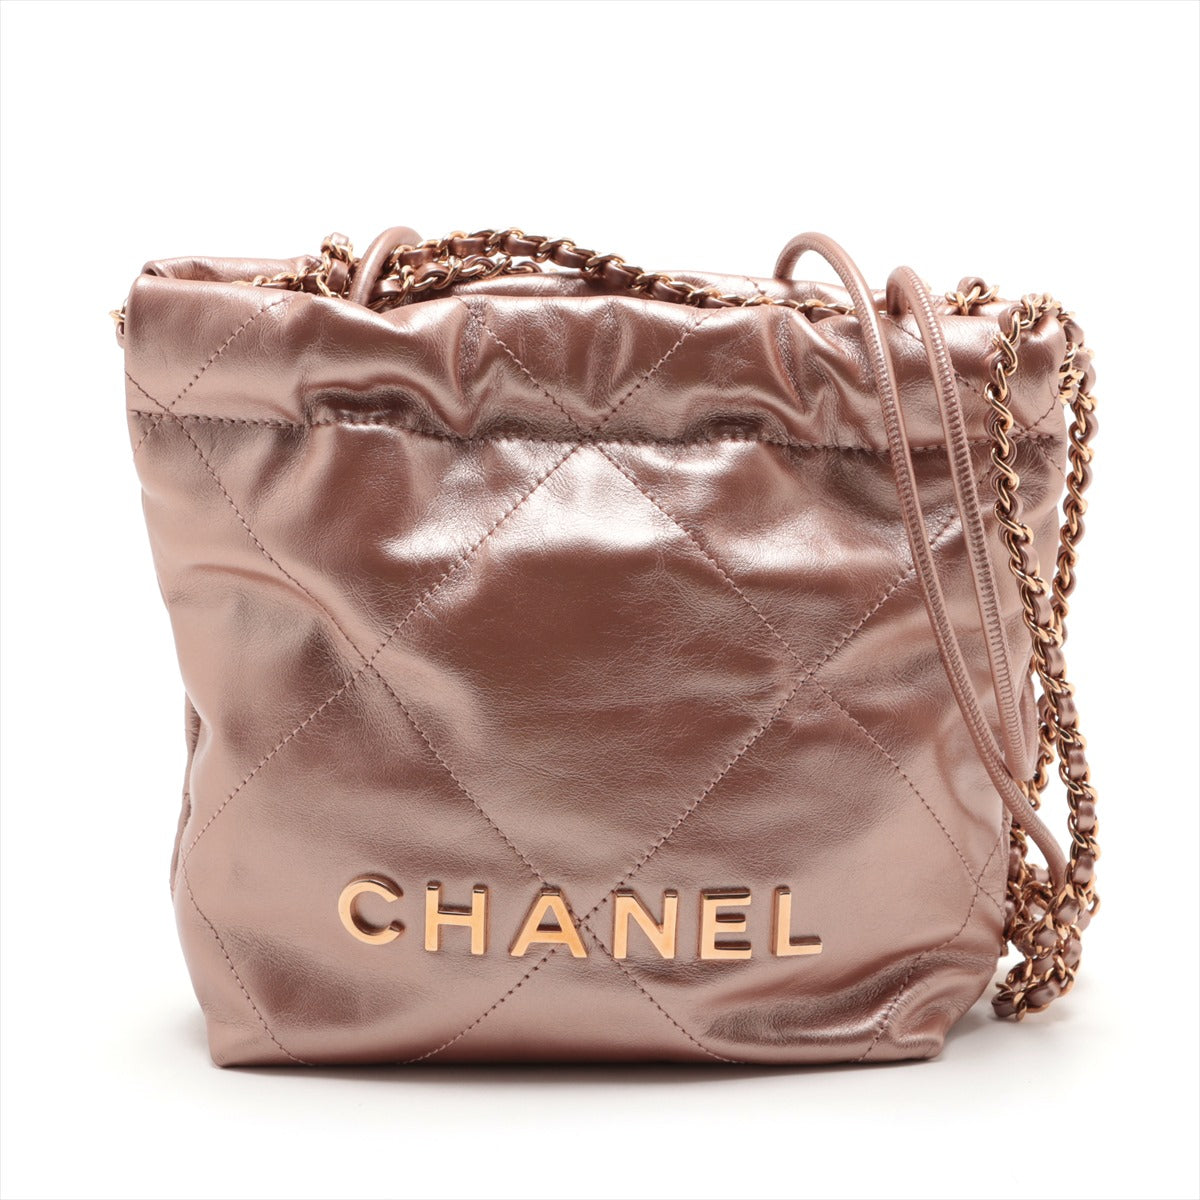 Chanel Chanel 22 mini Leather Chain Shoulder Bag Pink Gold Gold Metal Fittings